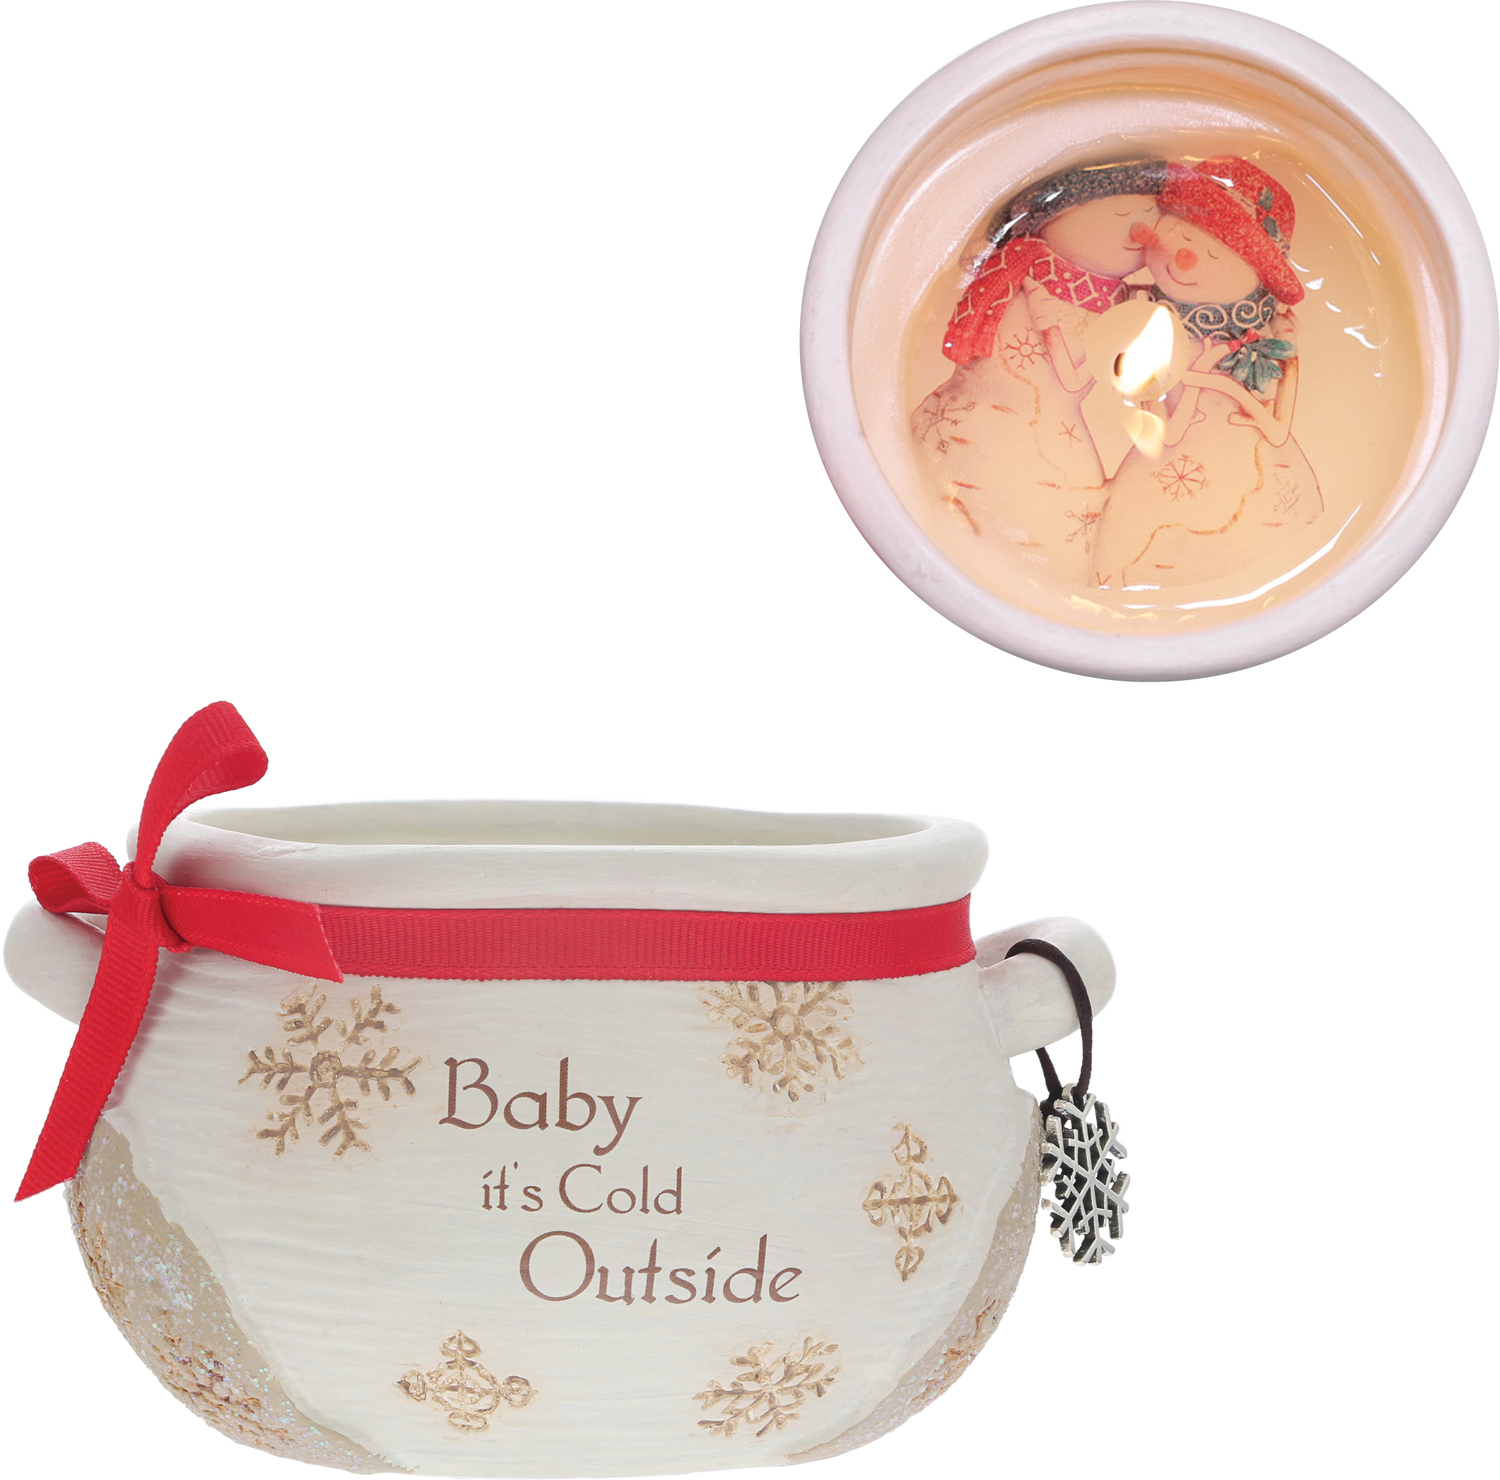 Cold Outside by The Birchhearts - Cold Outside - 9 oz - 100% Soy Wax Reveal Candle
Scent: Winter Snow